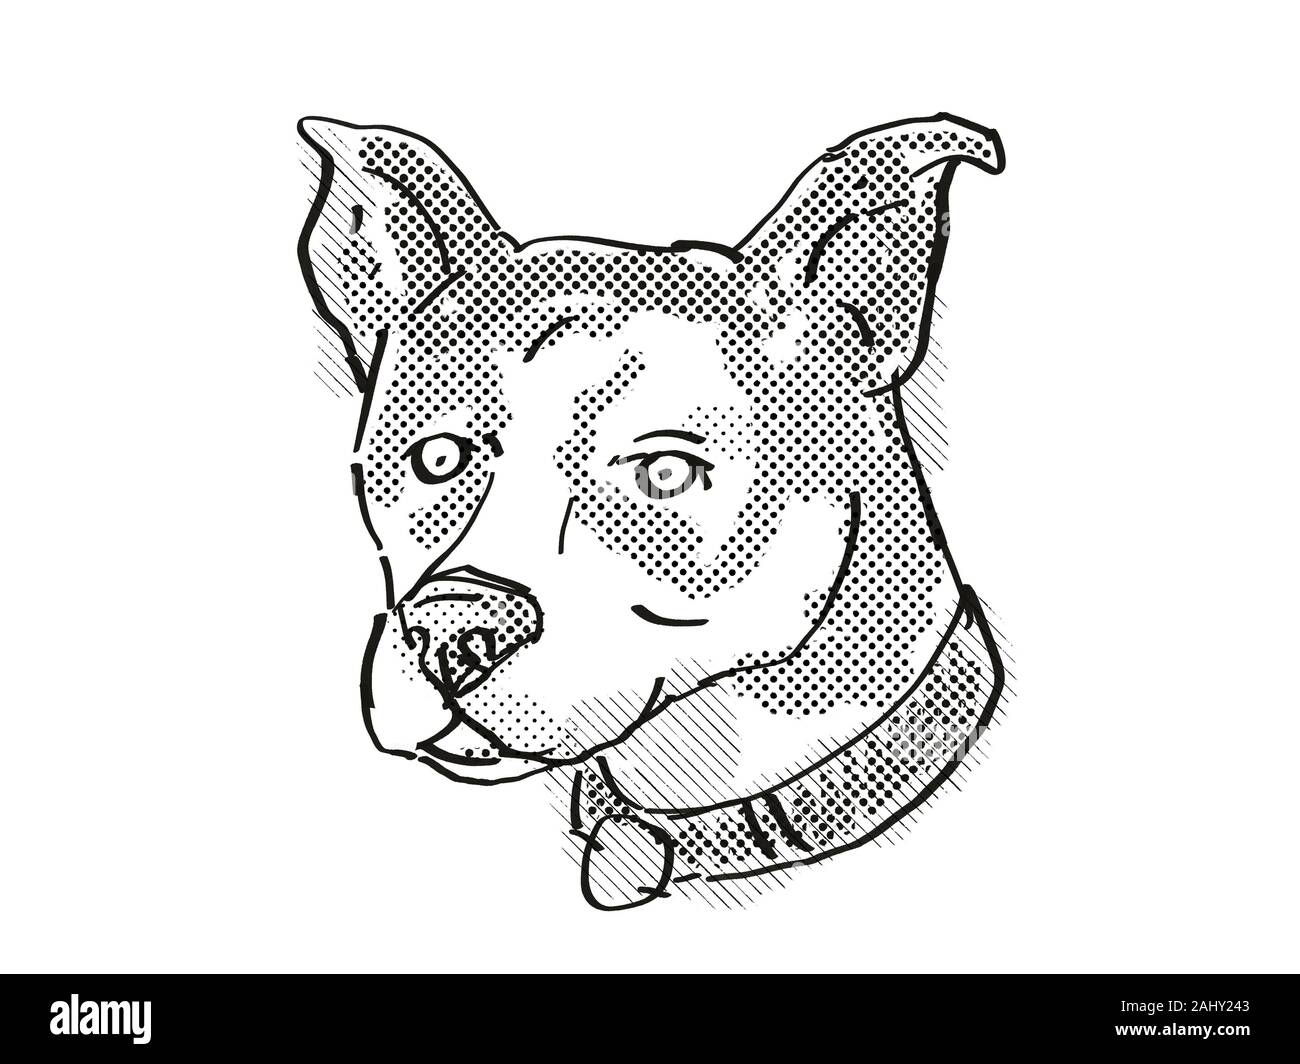 Retro cartoon style drawing of head of a Canaan Dog, a domestic dog or canine breed on isolated white background done in black and white. Stock Photo